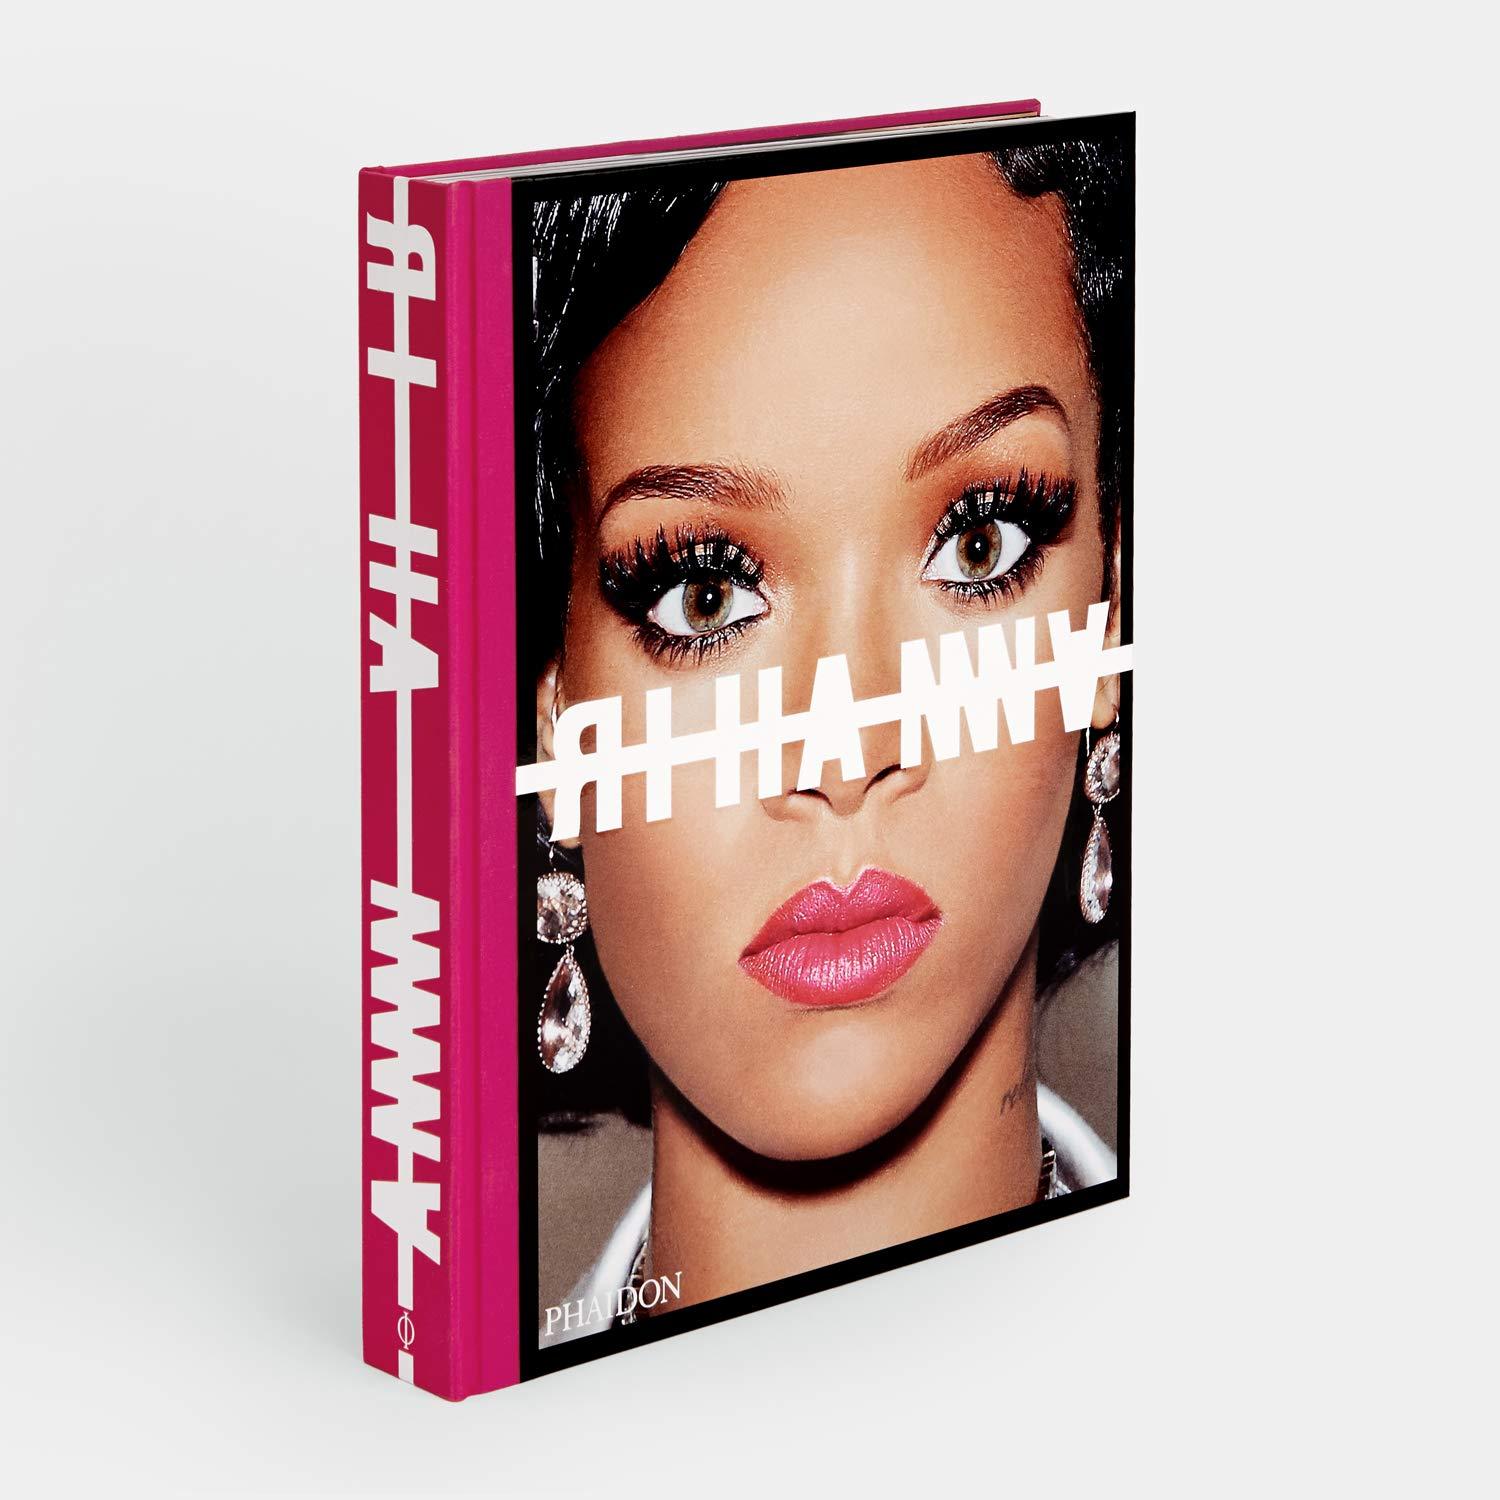 Rihanna invites you into her world with this stunning visual autobiography

